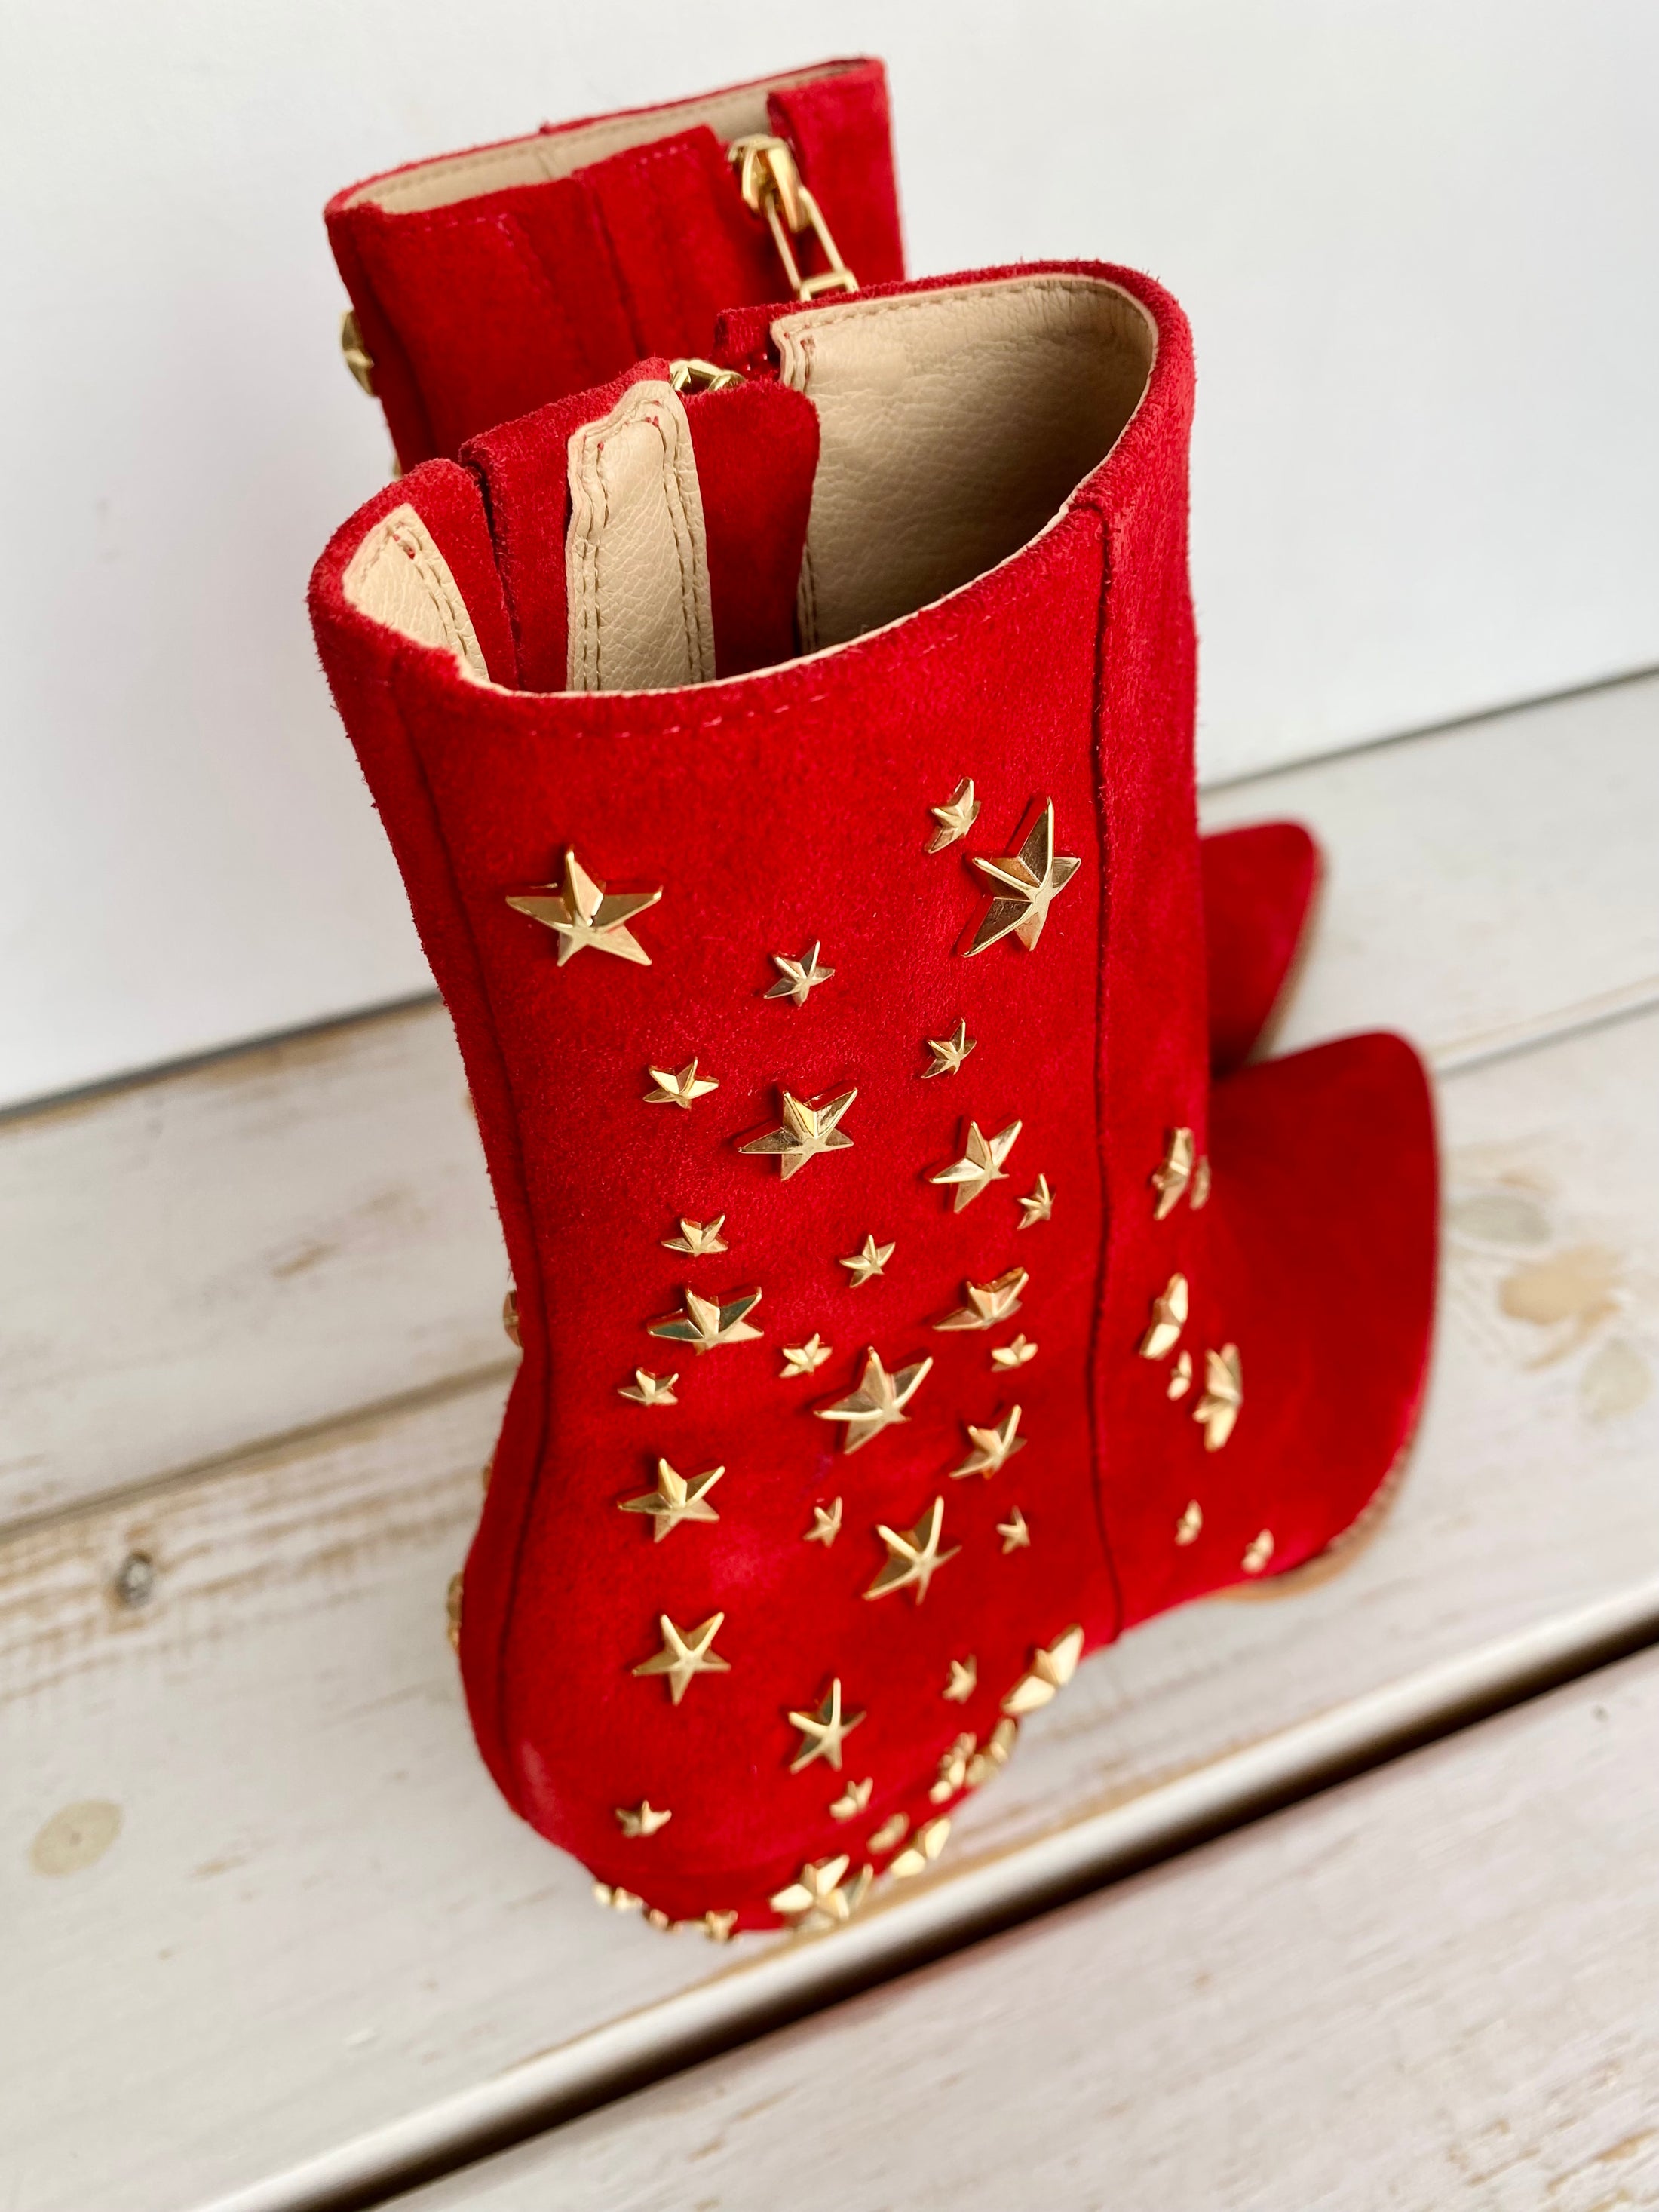 Gold star detail on matisse red boots